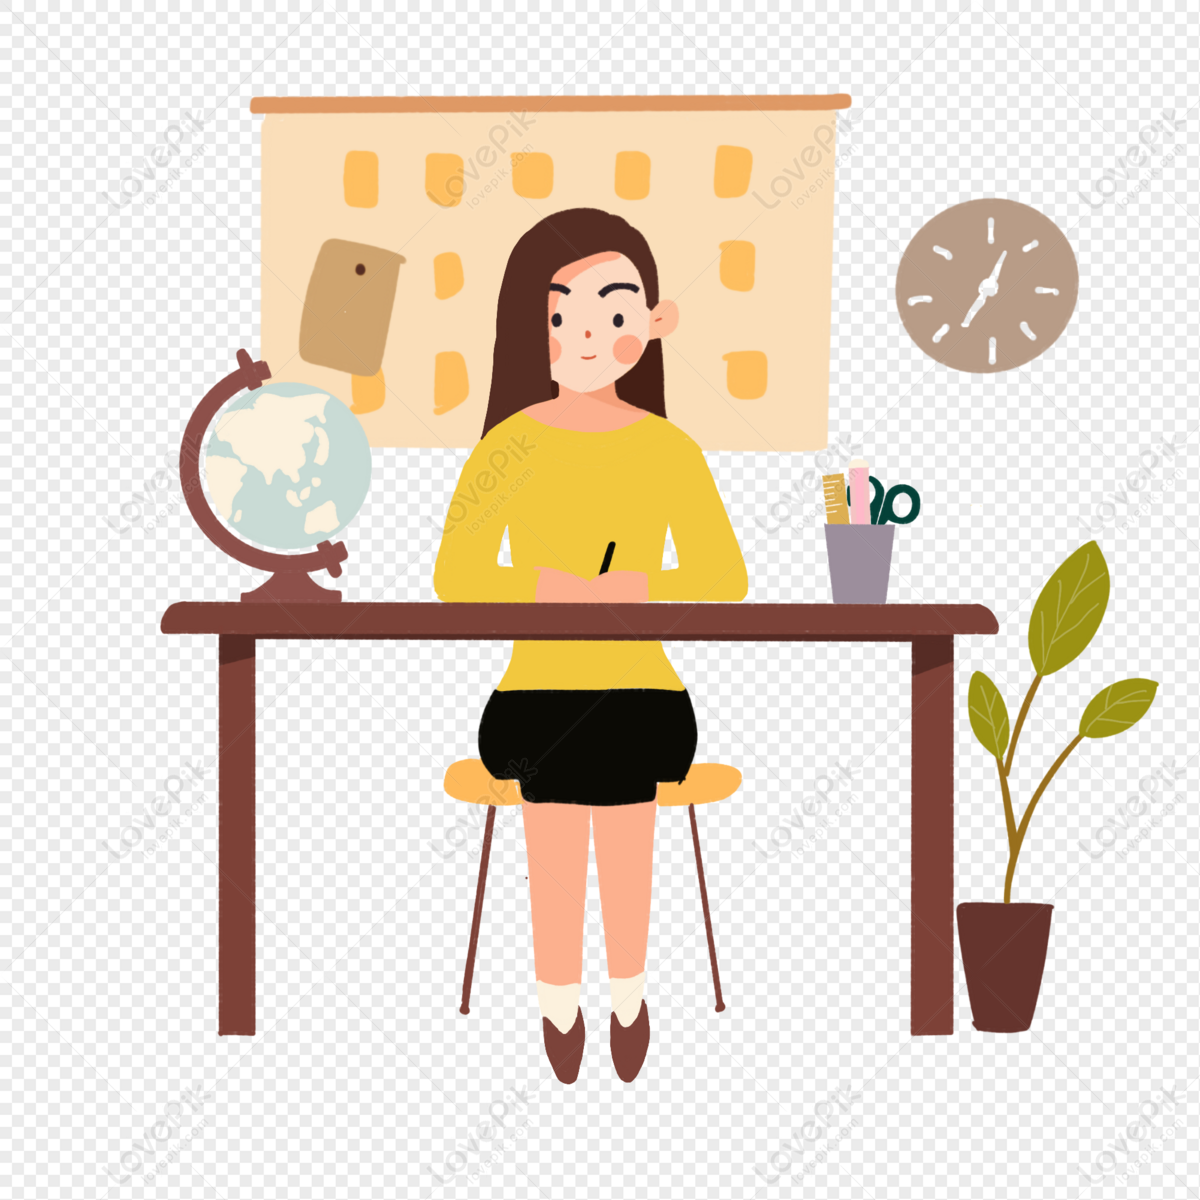 Teacher who corrects the assignment, knowledge gap, and homework, desk png image